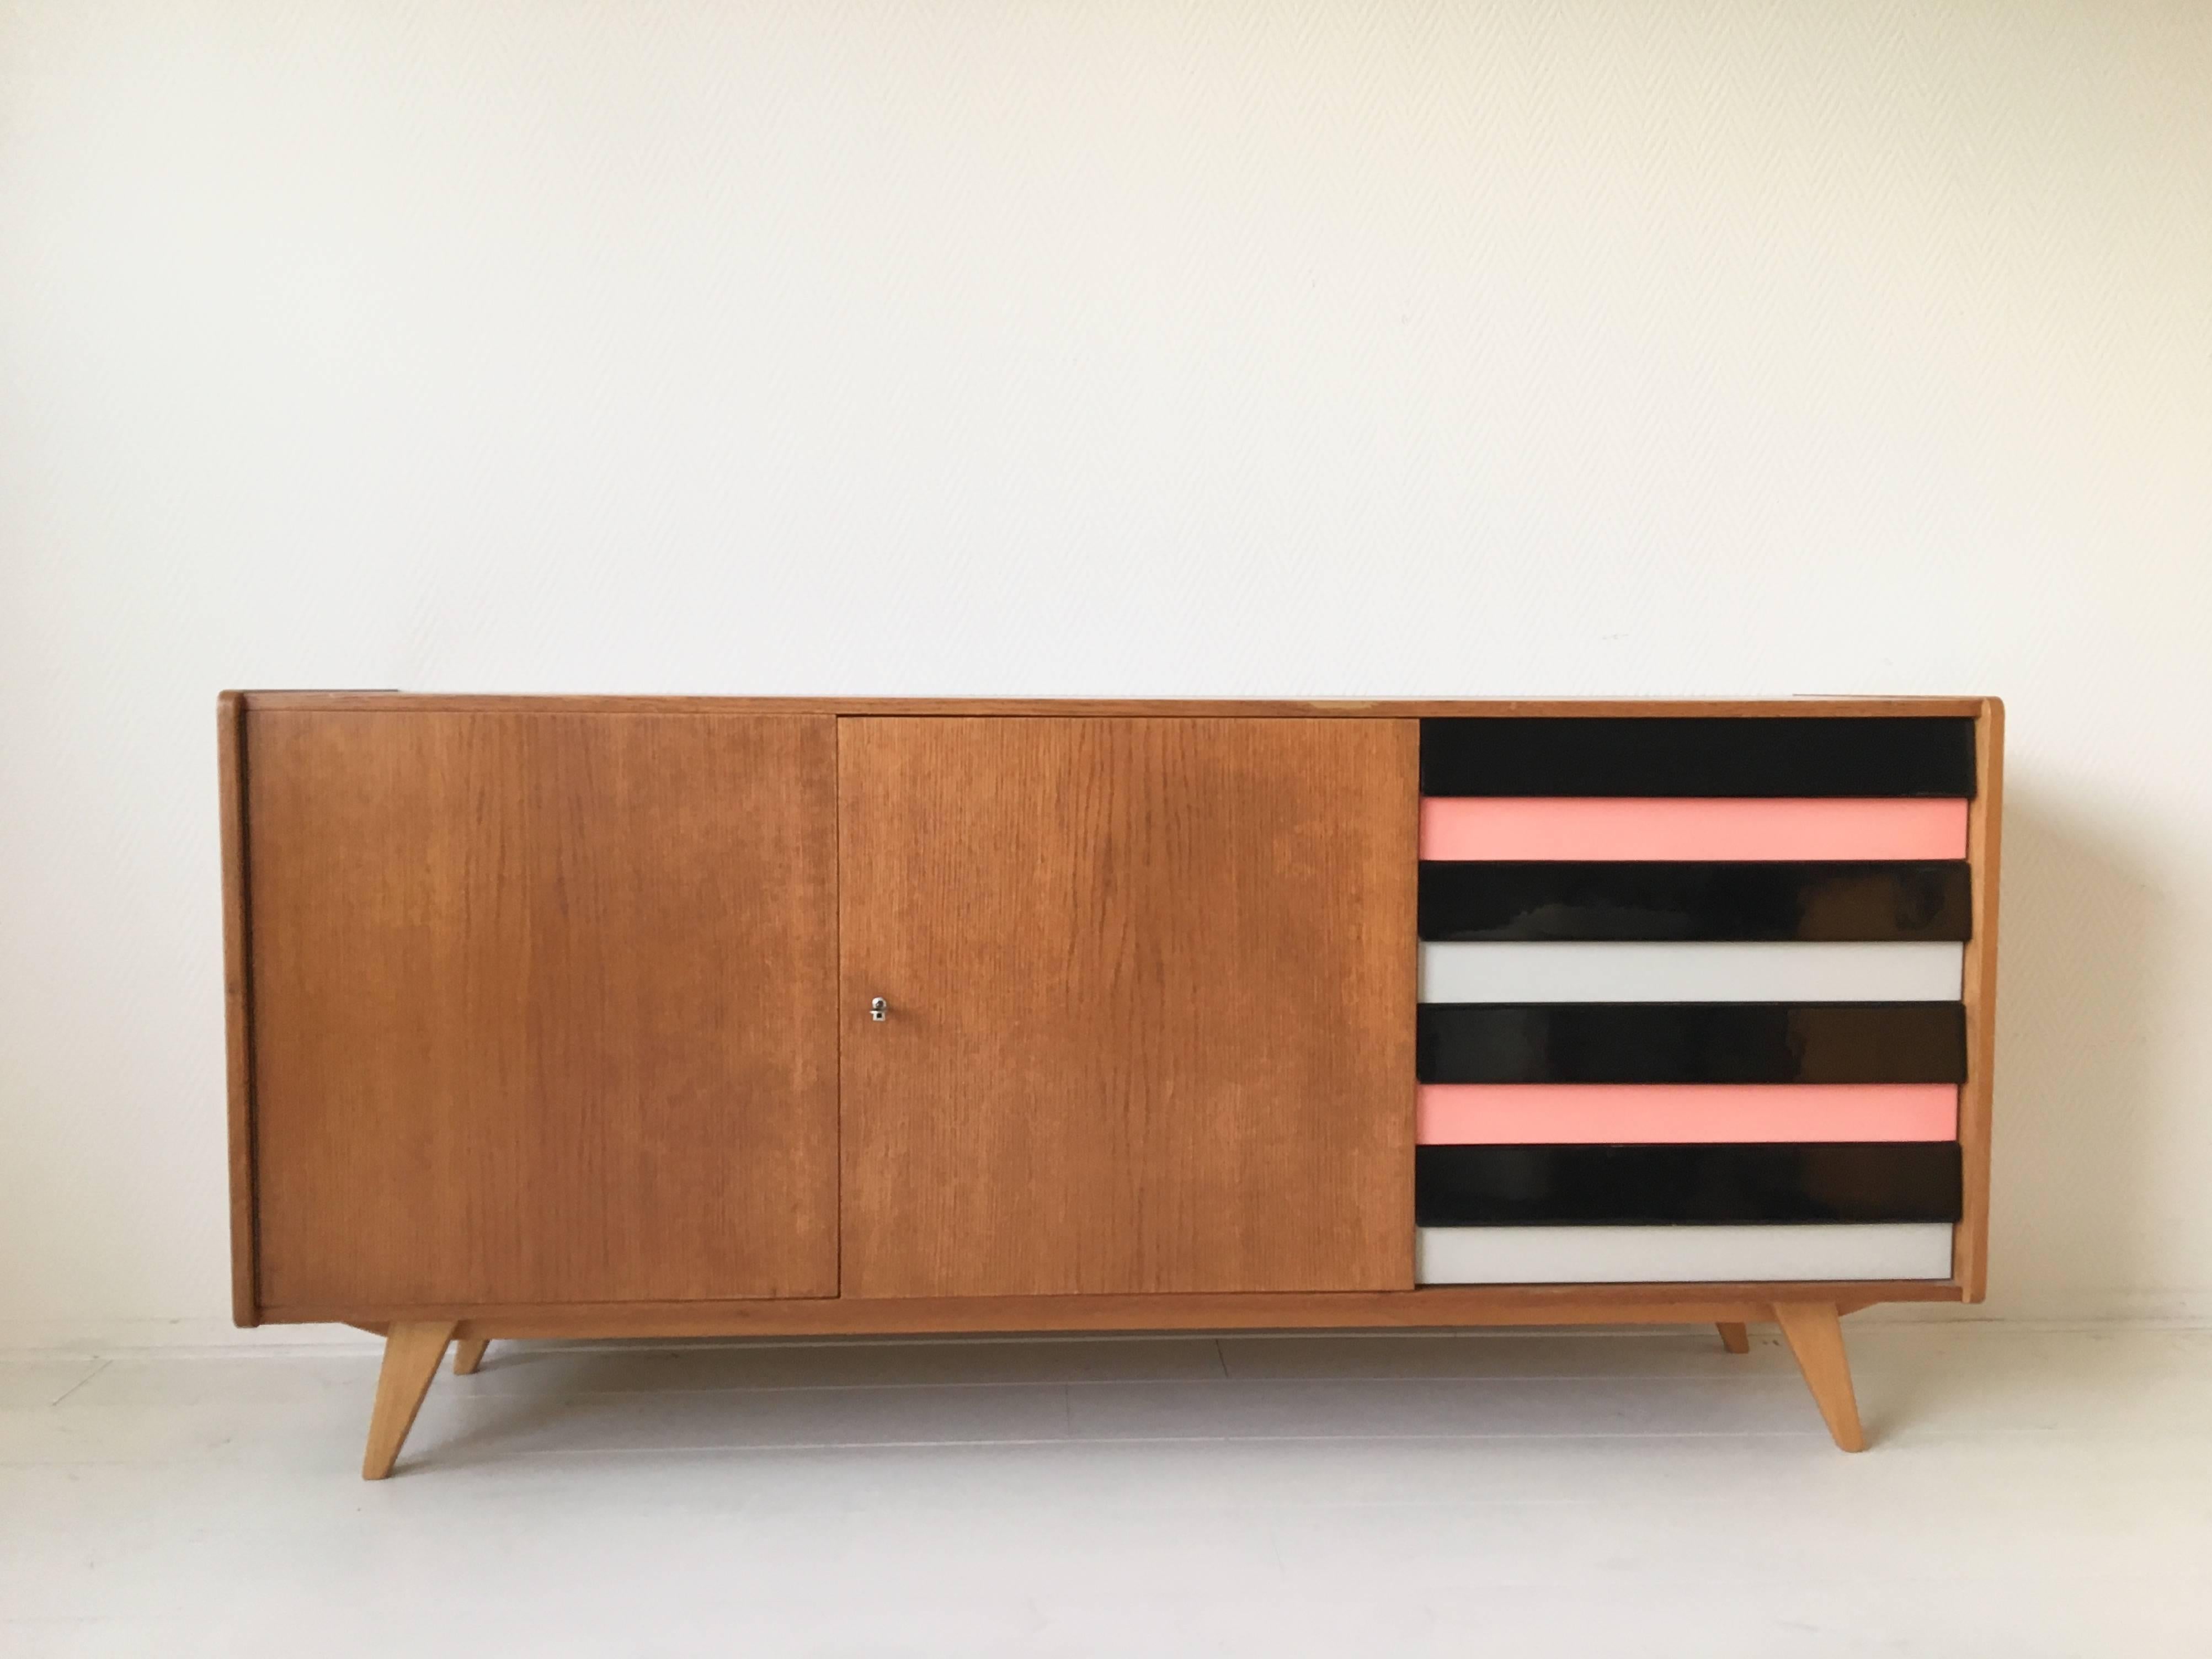 First shown at the Brussels expo in 1958, this elegant sideboard designed by Jiri Jiroutek for Interier Praha.
This piece features a teak veneered structure with two doors and four drawers in Pink, White and Black.
Good condition with wear